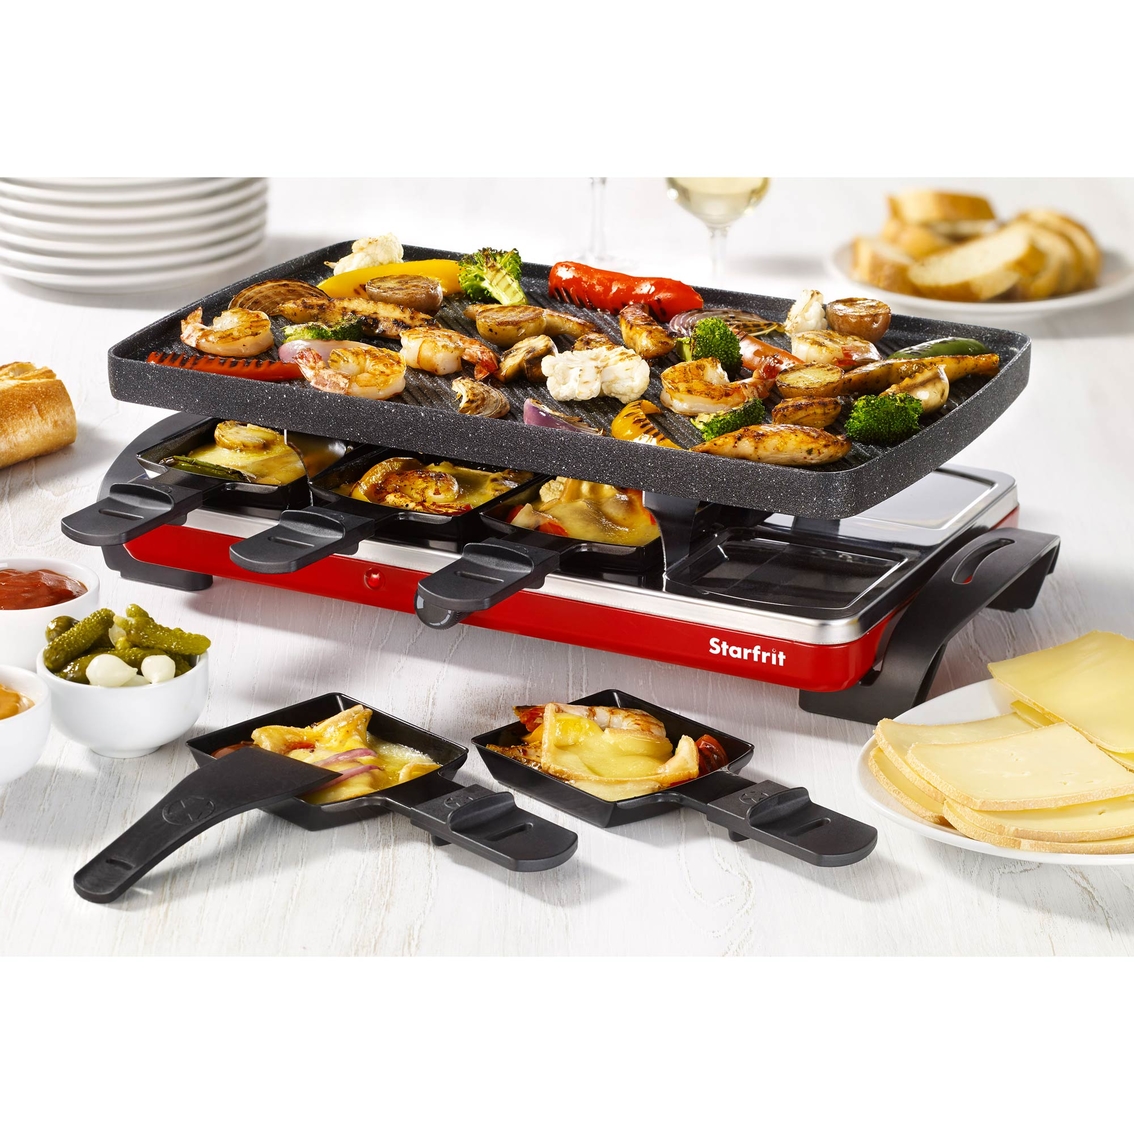 Starfrit The Rock Raclette Party Grill Set - Image 6 of 6